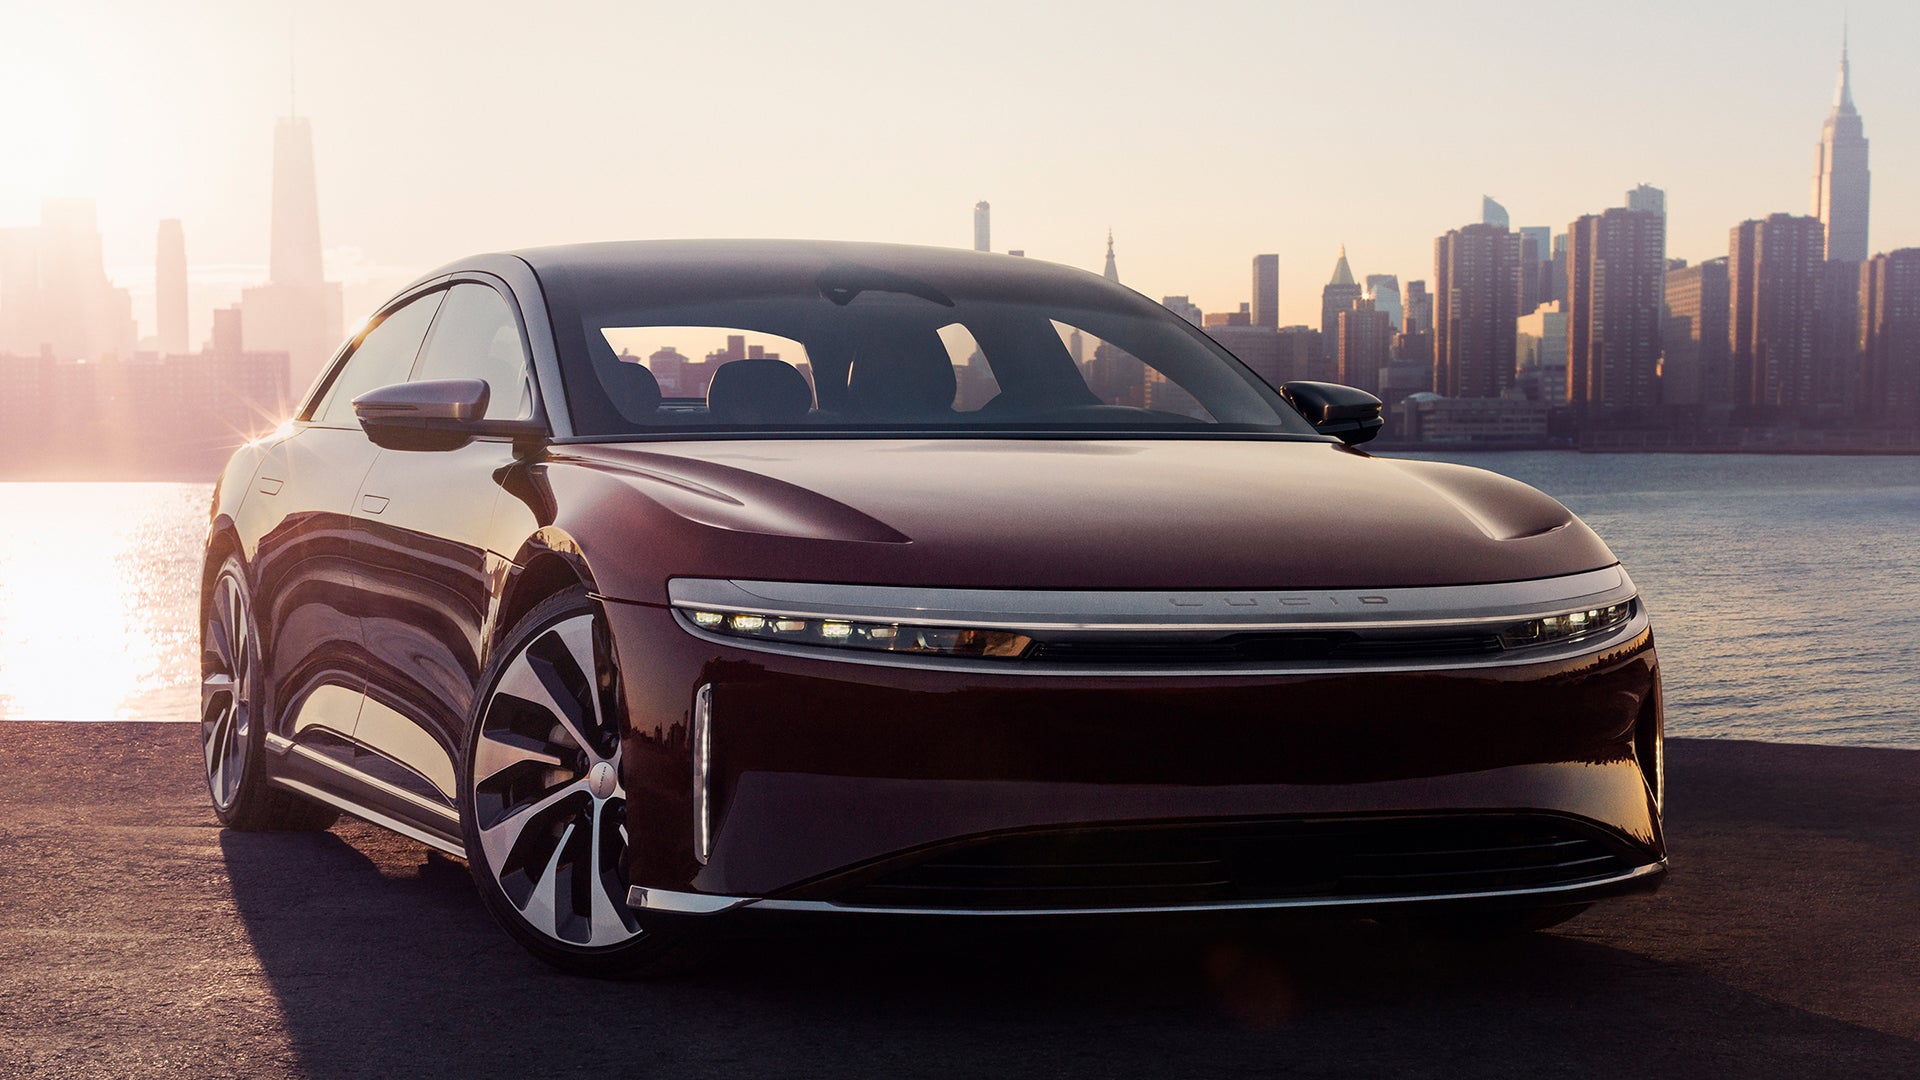 I'm Going to See the Futuristic Lucid Air EV Sedan Next Week. What Do